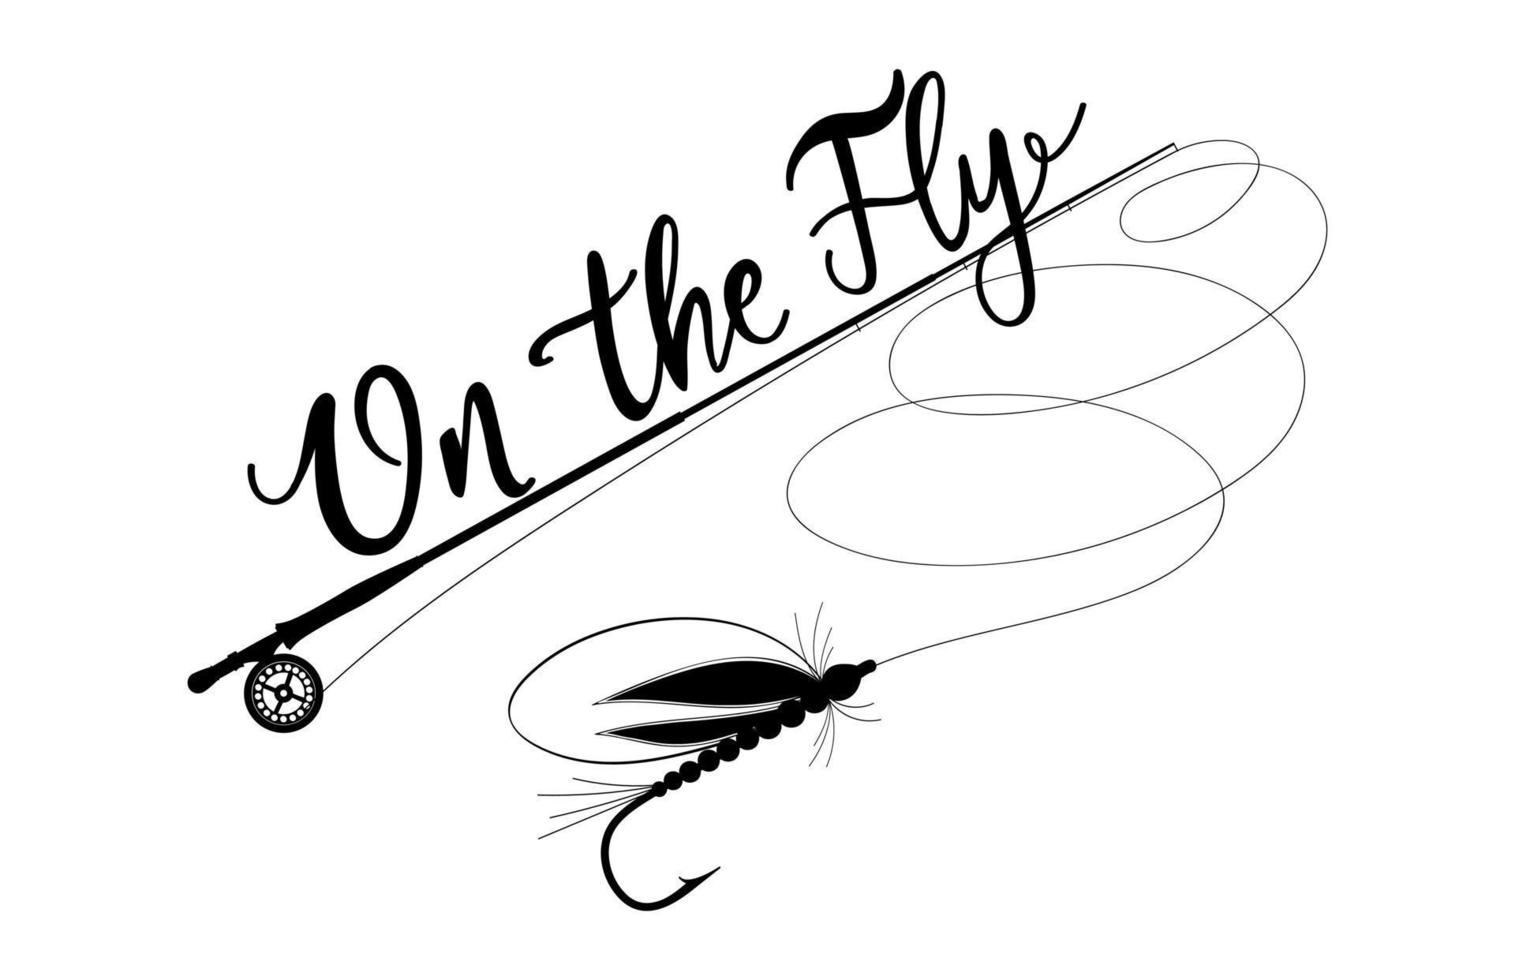 On the fly. Fishing rod with fly fishing lure. Hand drawn vector stock fly fishing illustration.